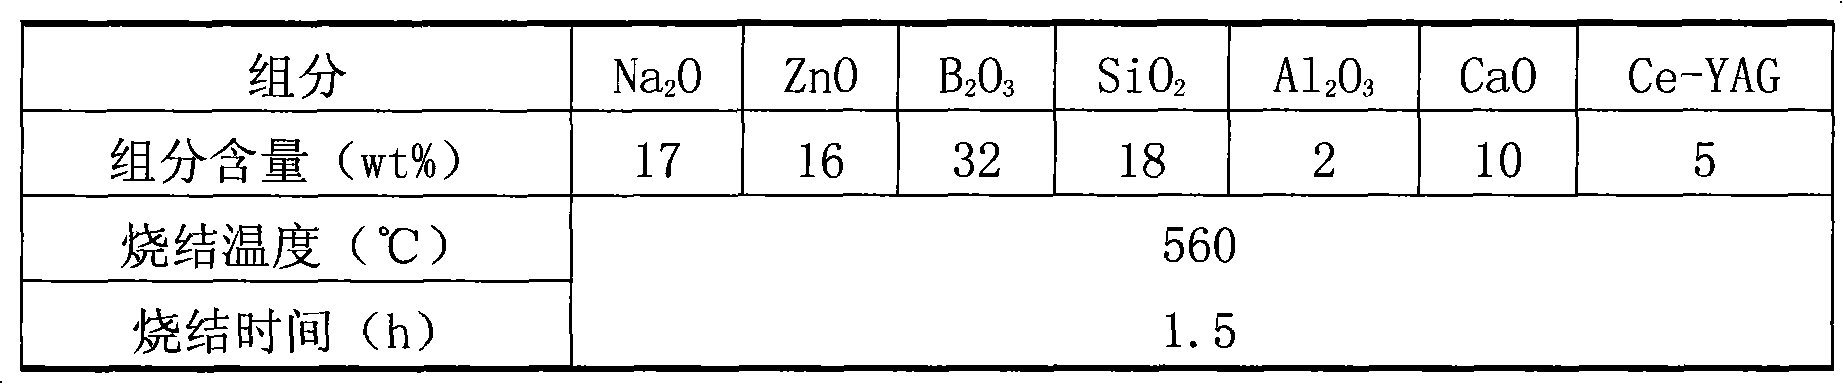 Low-melting-point fluorescent glass for white light LED and preparation method thereof